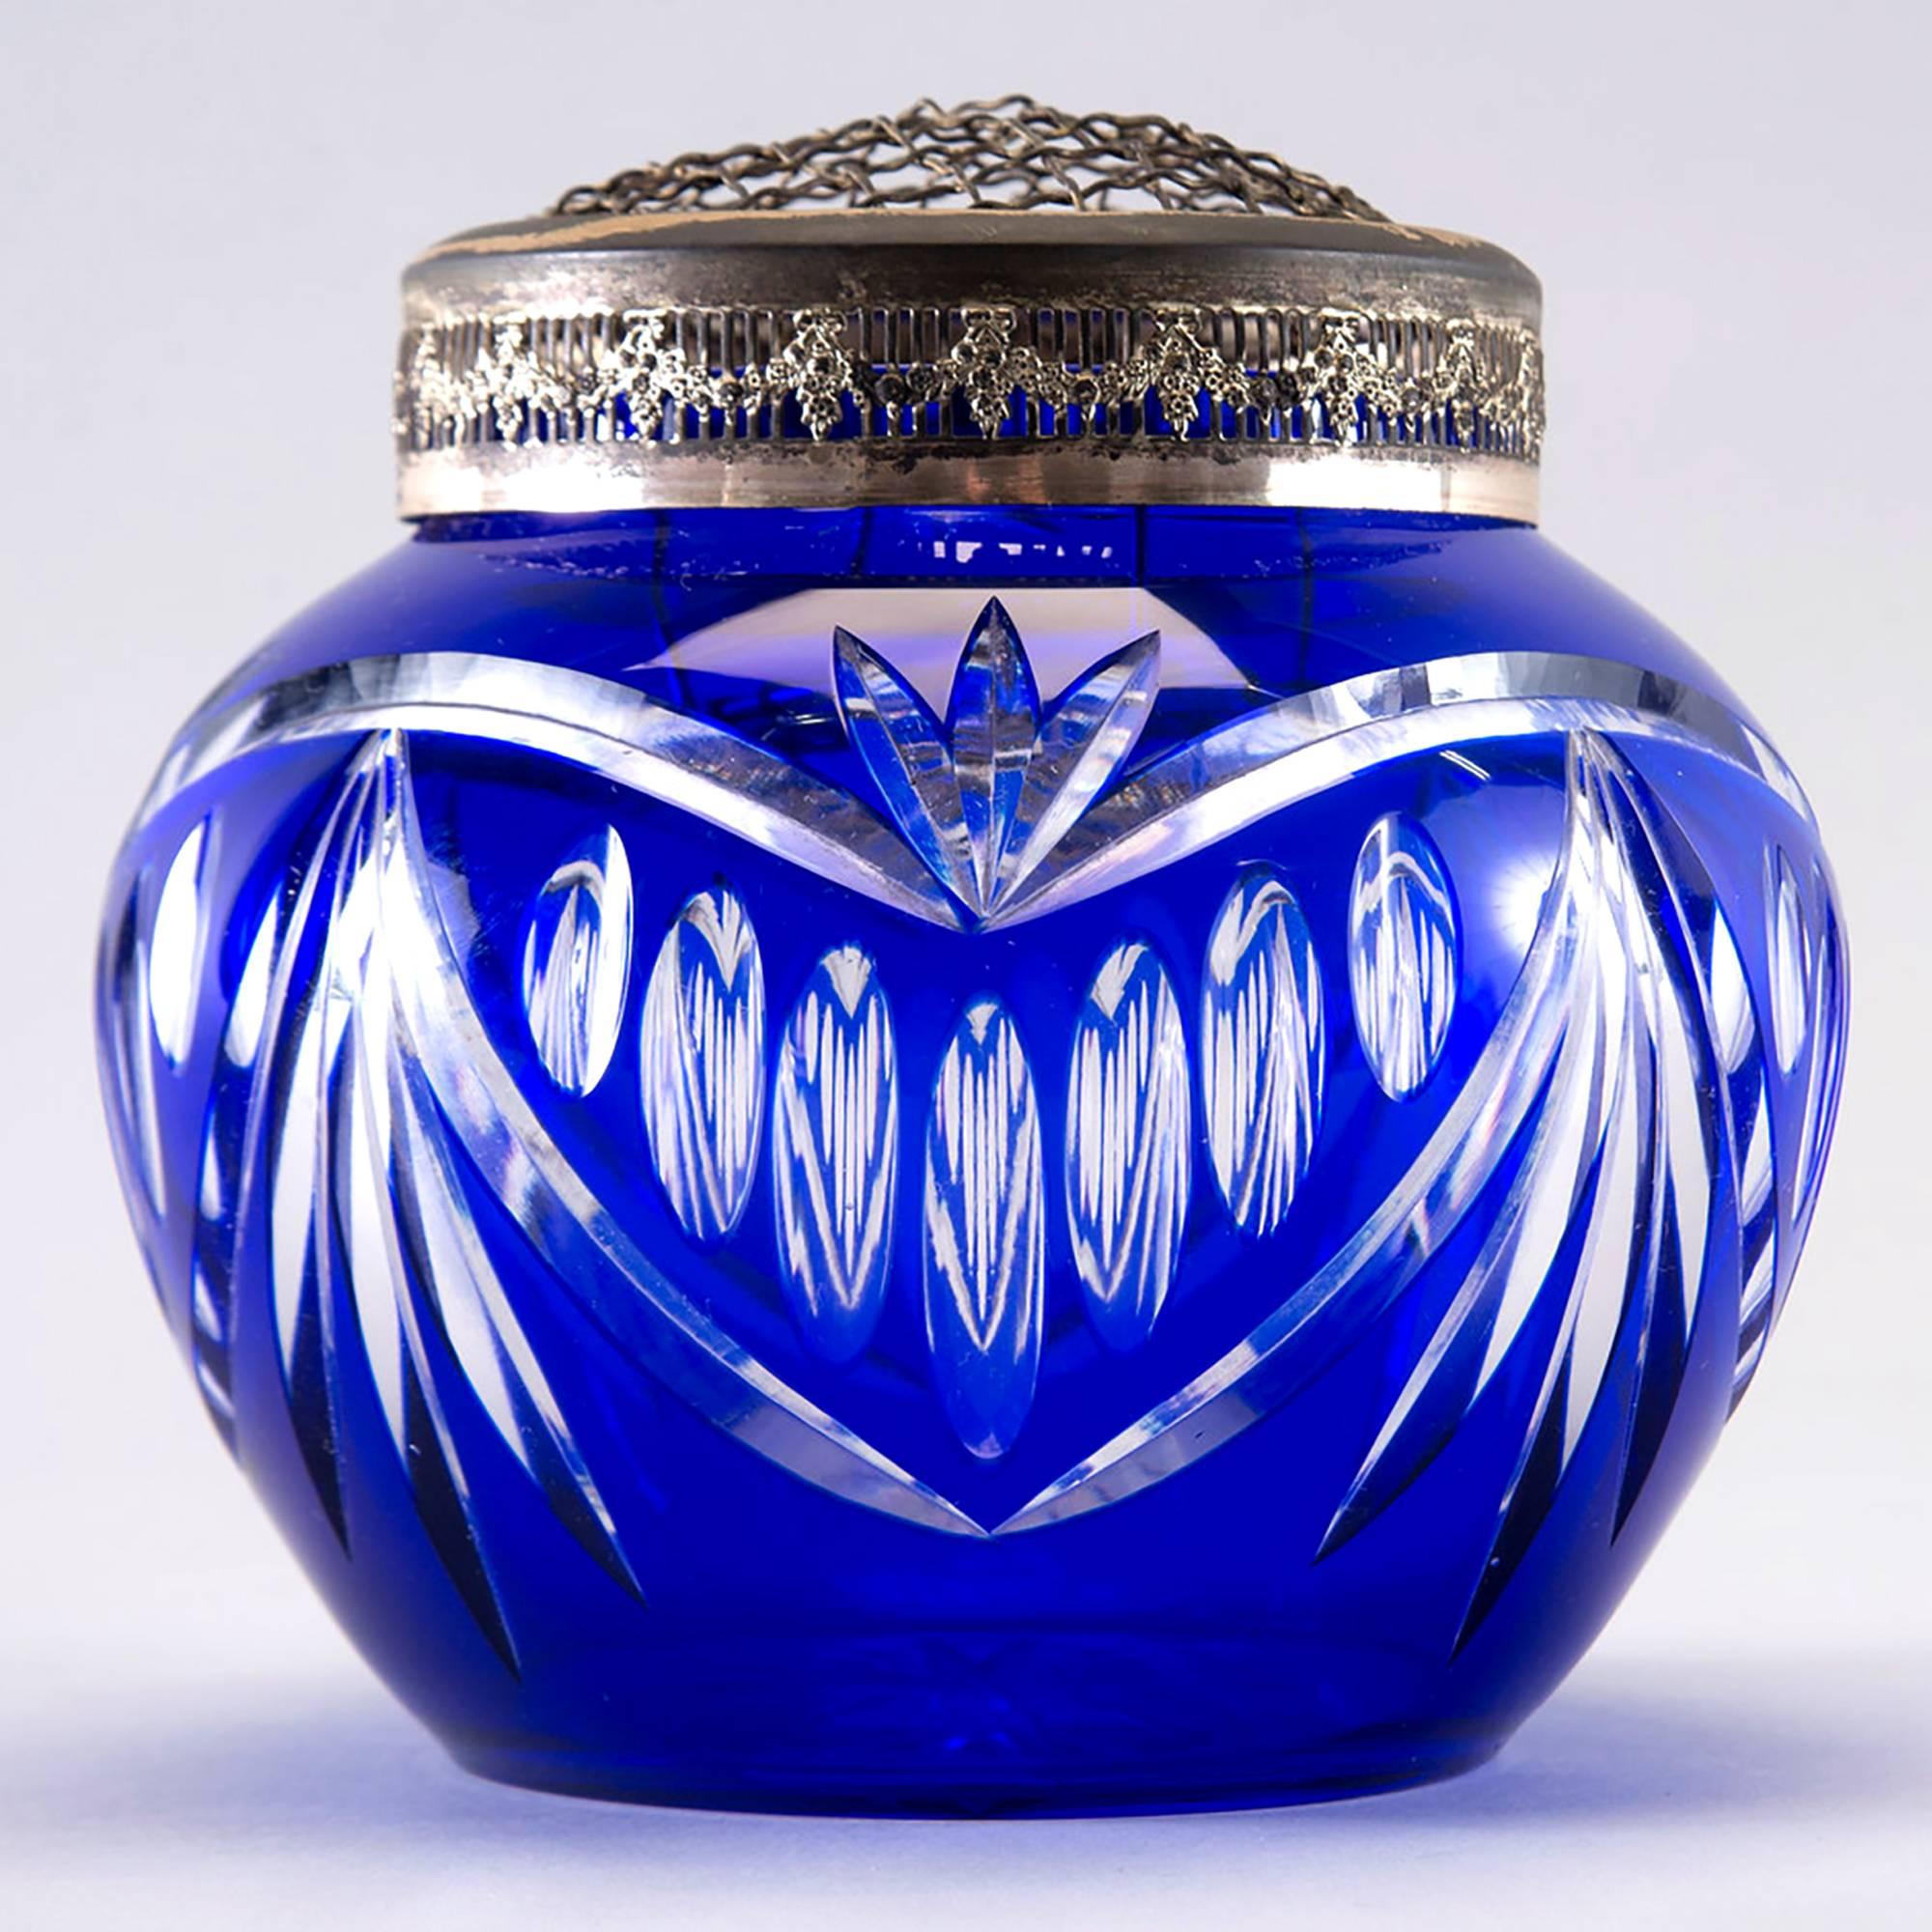 Circa 1920s European cut to clear cobalt blue crystal rose bowl vase with original brass flower frog topper. No maker’s mark, but believed to be Val St. Lambert of Belgium.